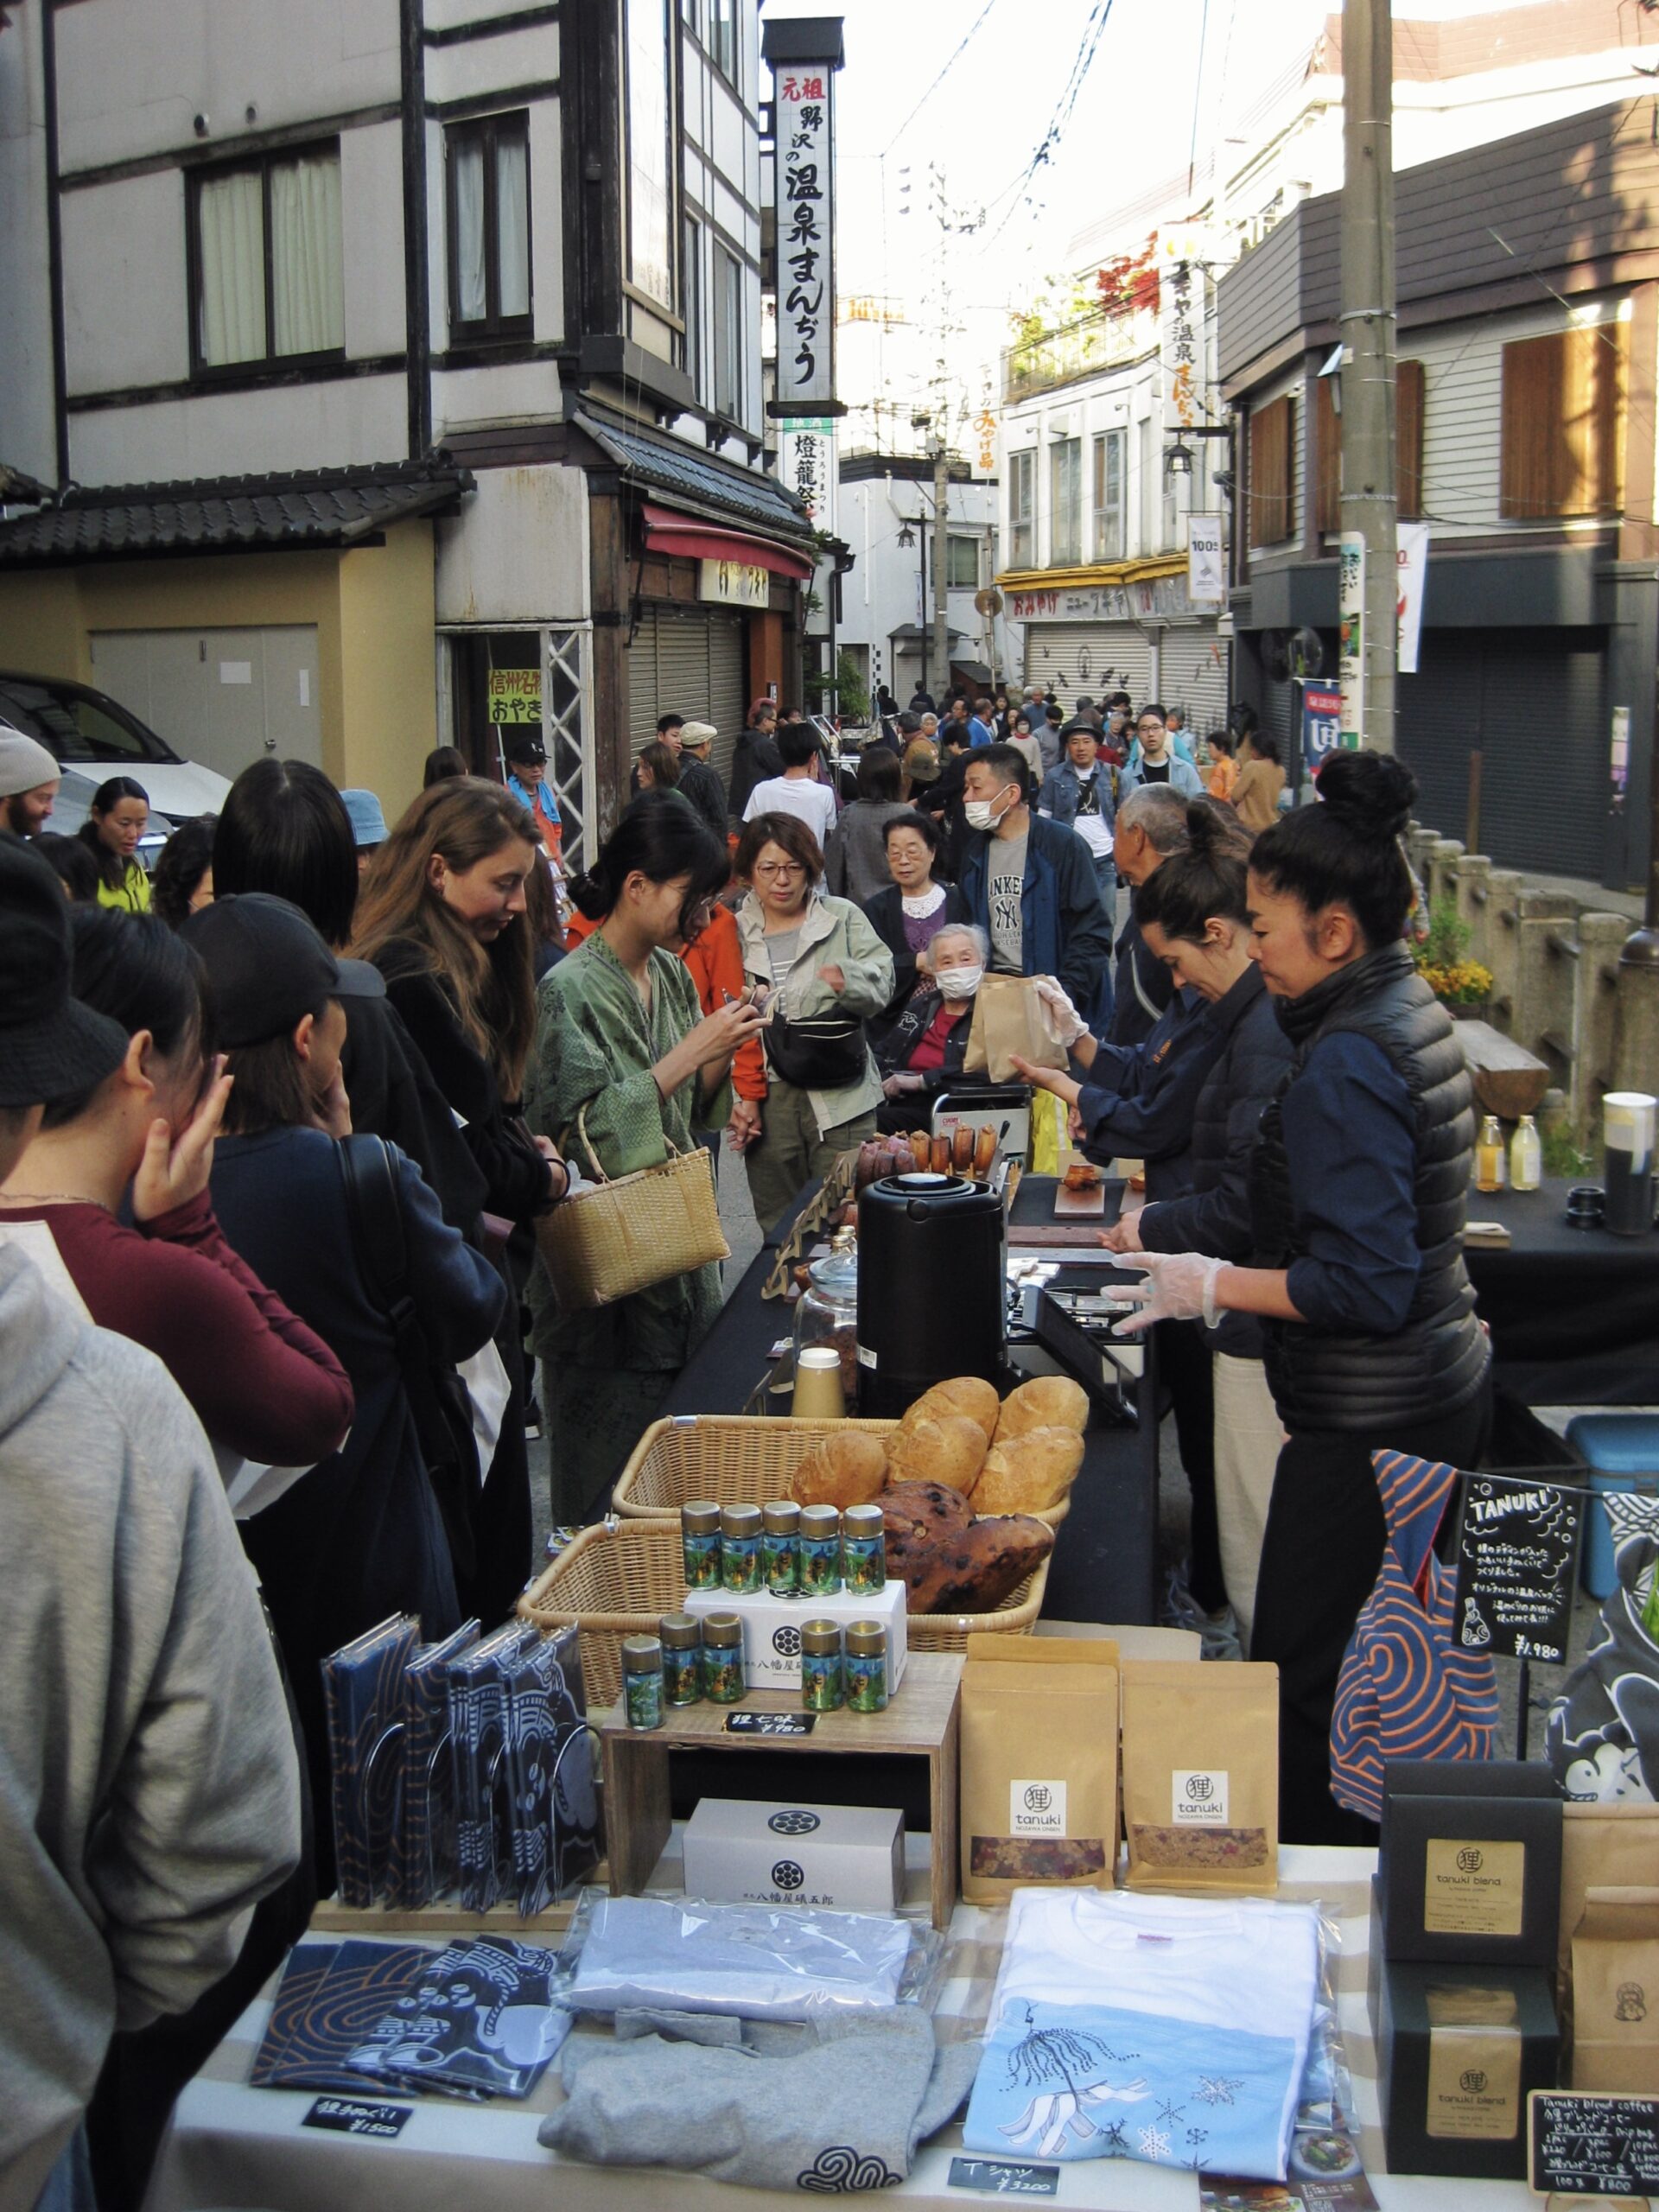 Many have gathered for the annual Oyu Street market during Golden Week